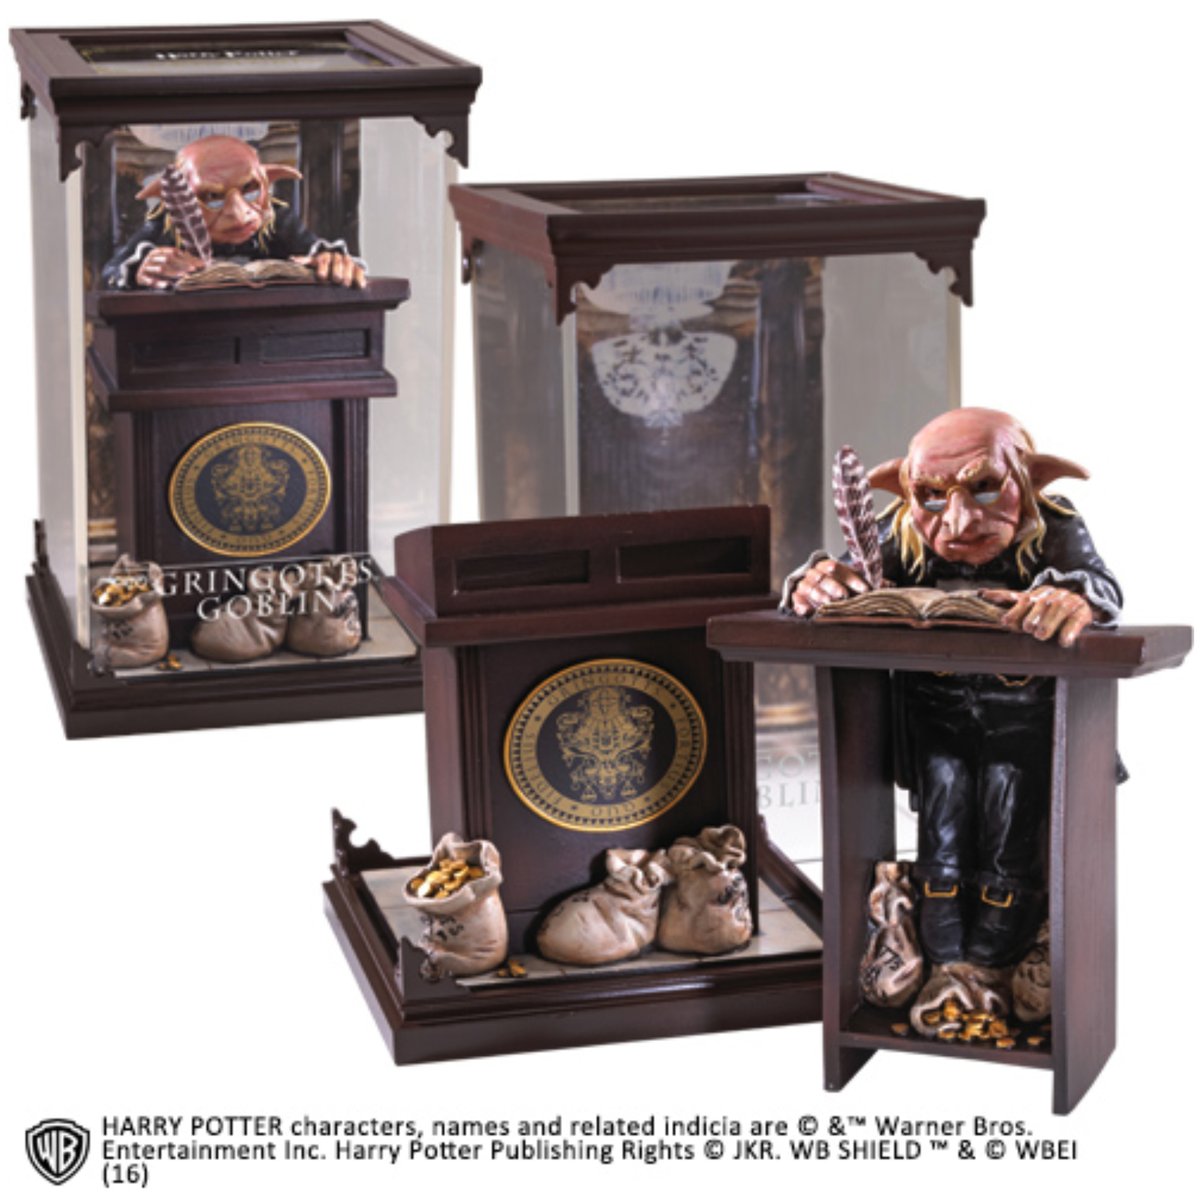 A finely crafted, hand painted, PBS plastic sculpture of the Gringotts Goblin signed by Warwick Davis in Harry Potter & the Philosopher's Stone.'And does Mr Harry Potter have his key?'This item will make perfect personalised gift for any occasion. thesignatureshop.co.uk/products/noble…